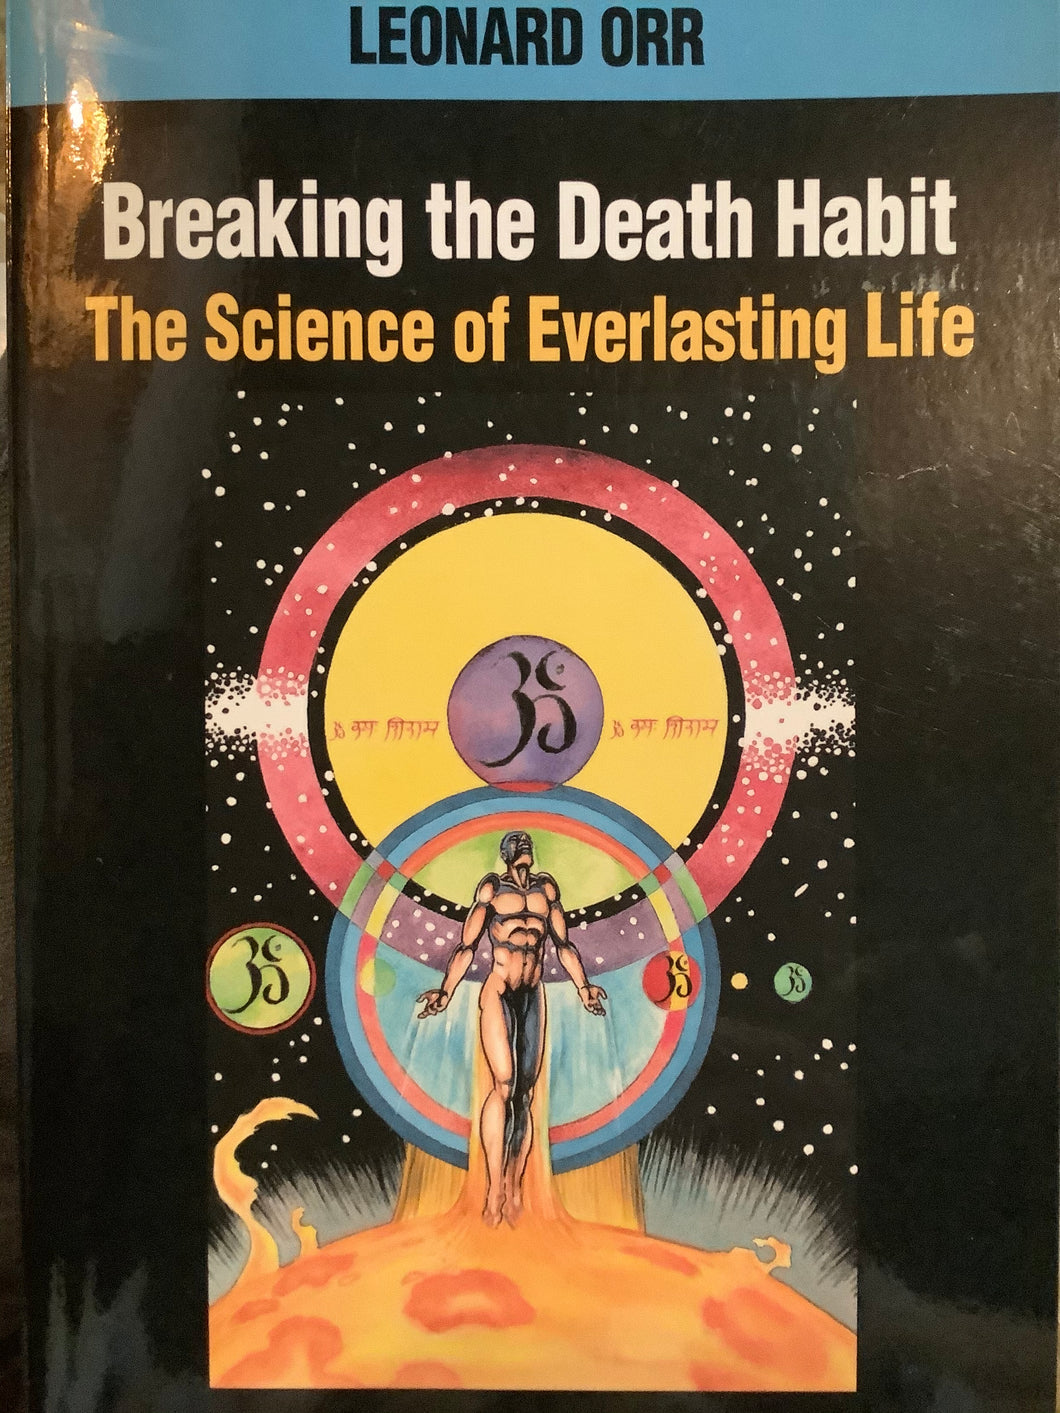 Breaking the Death Habit: The Science of Everlasting Life by Leonard Orr